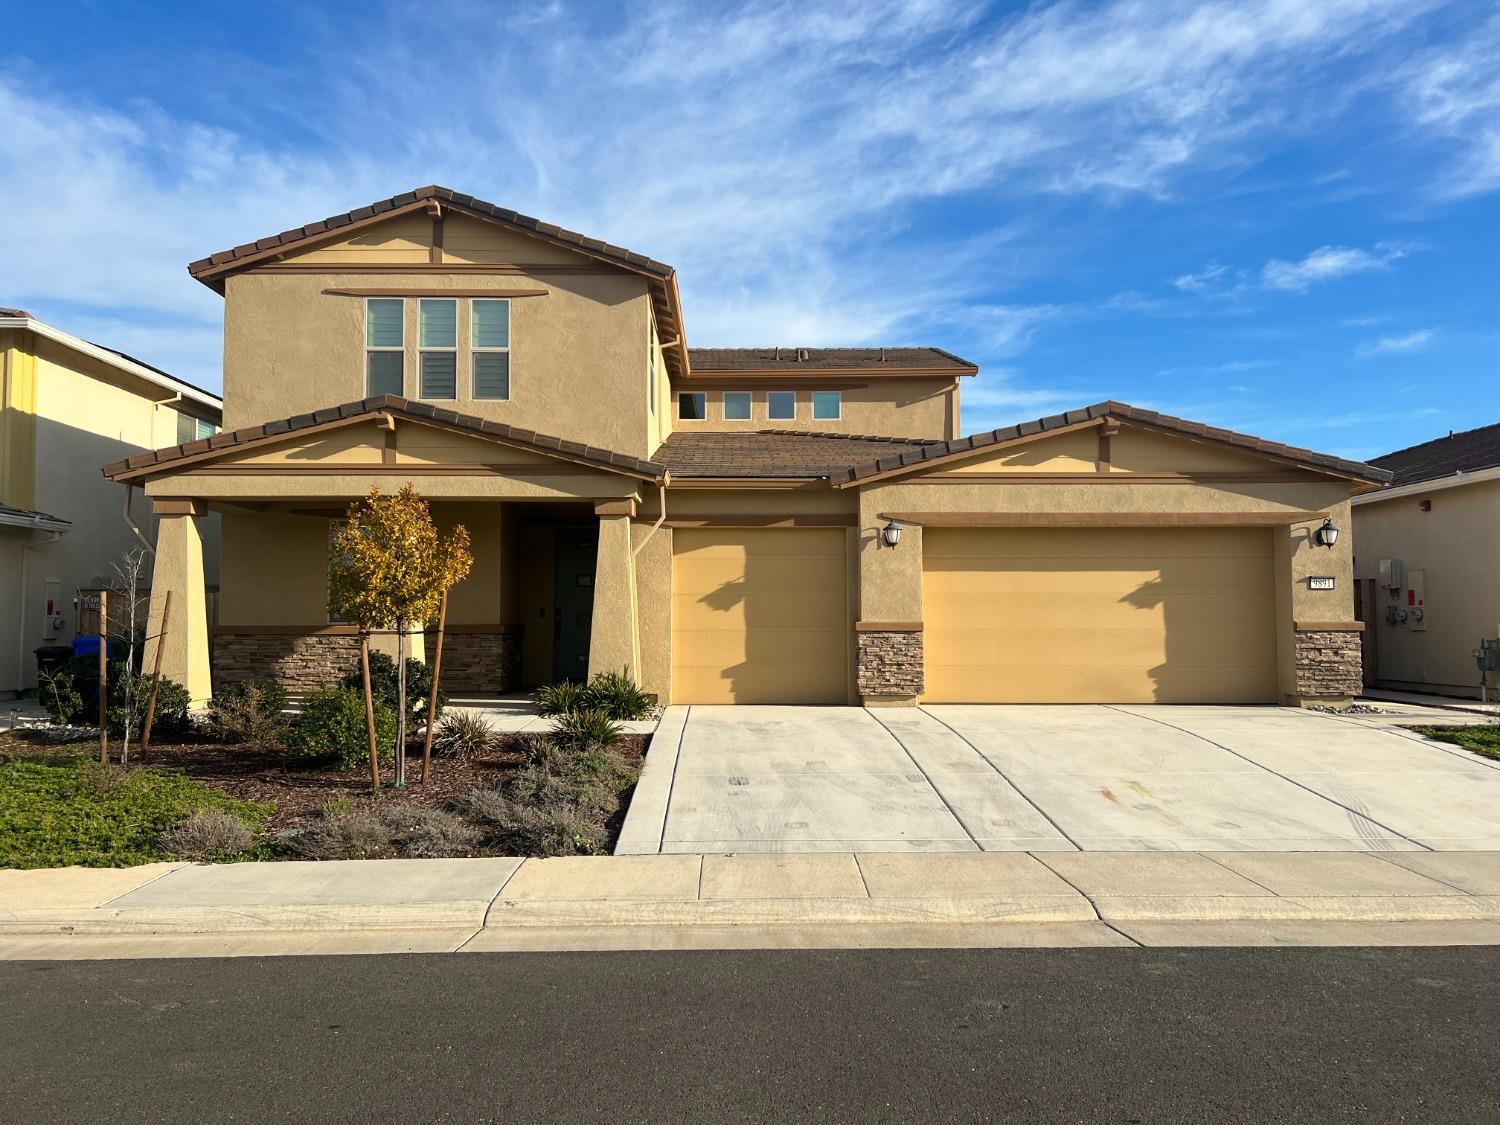 This is Lennar's most popular Fieldstone model with 3319sqf of living space and 20ft ceilings. Can a